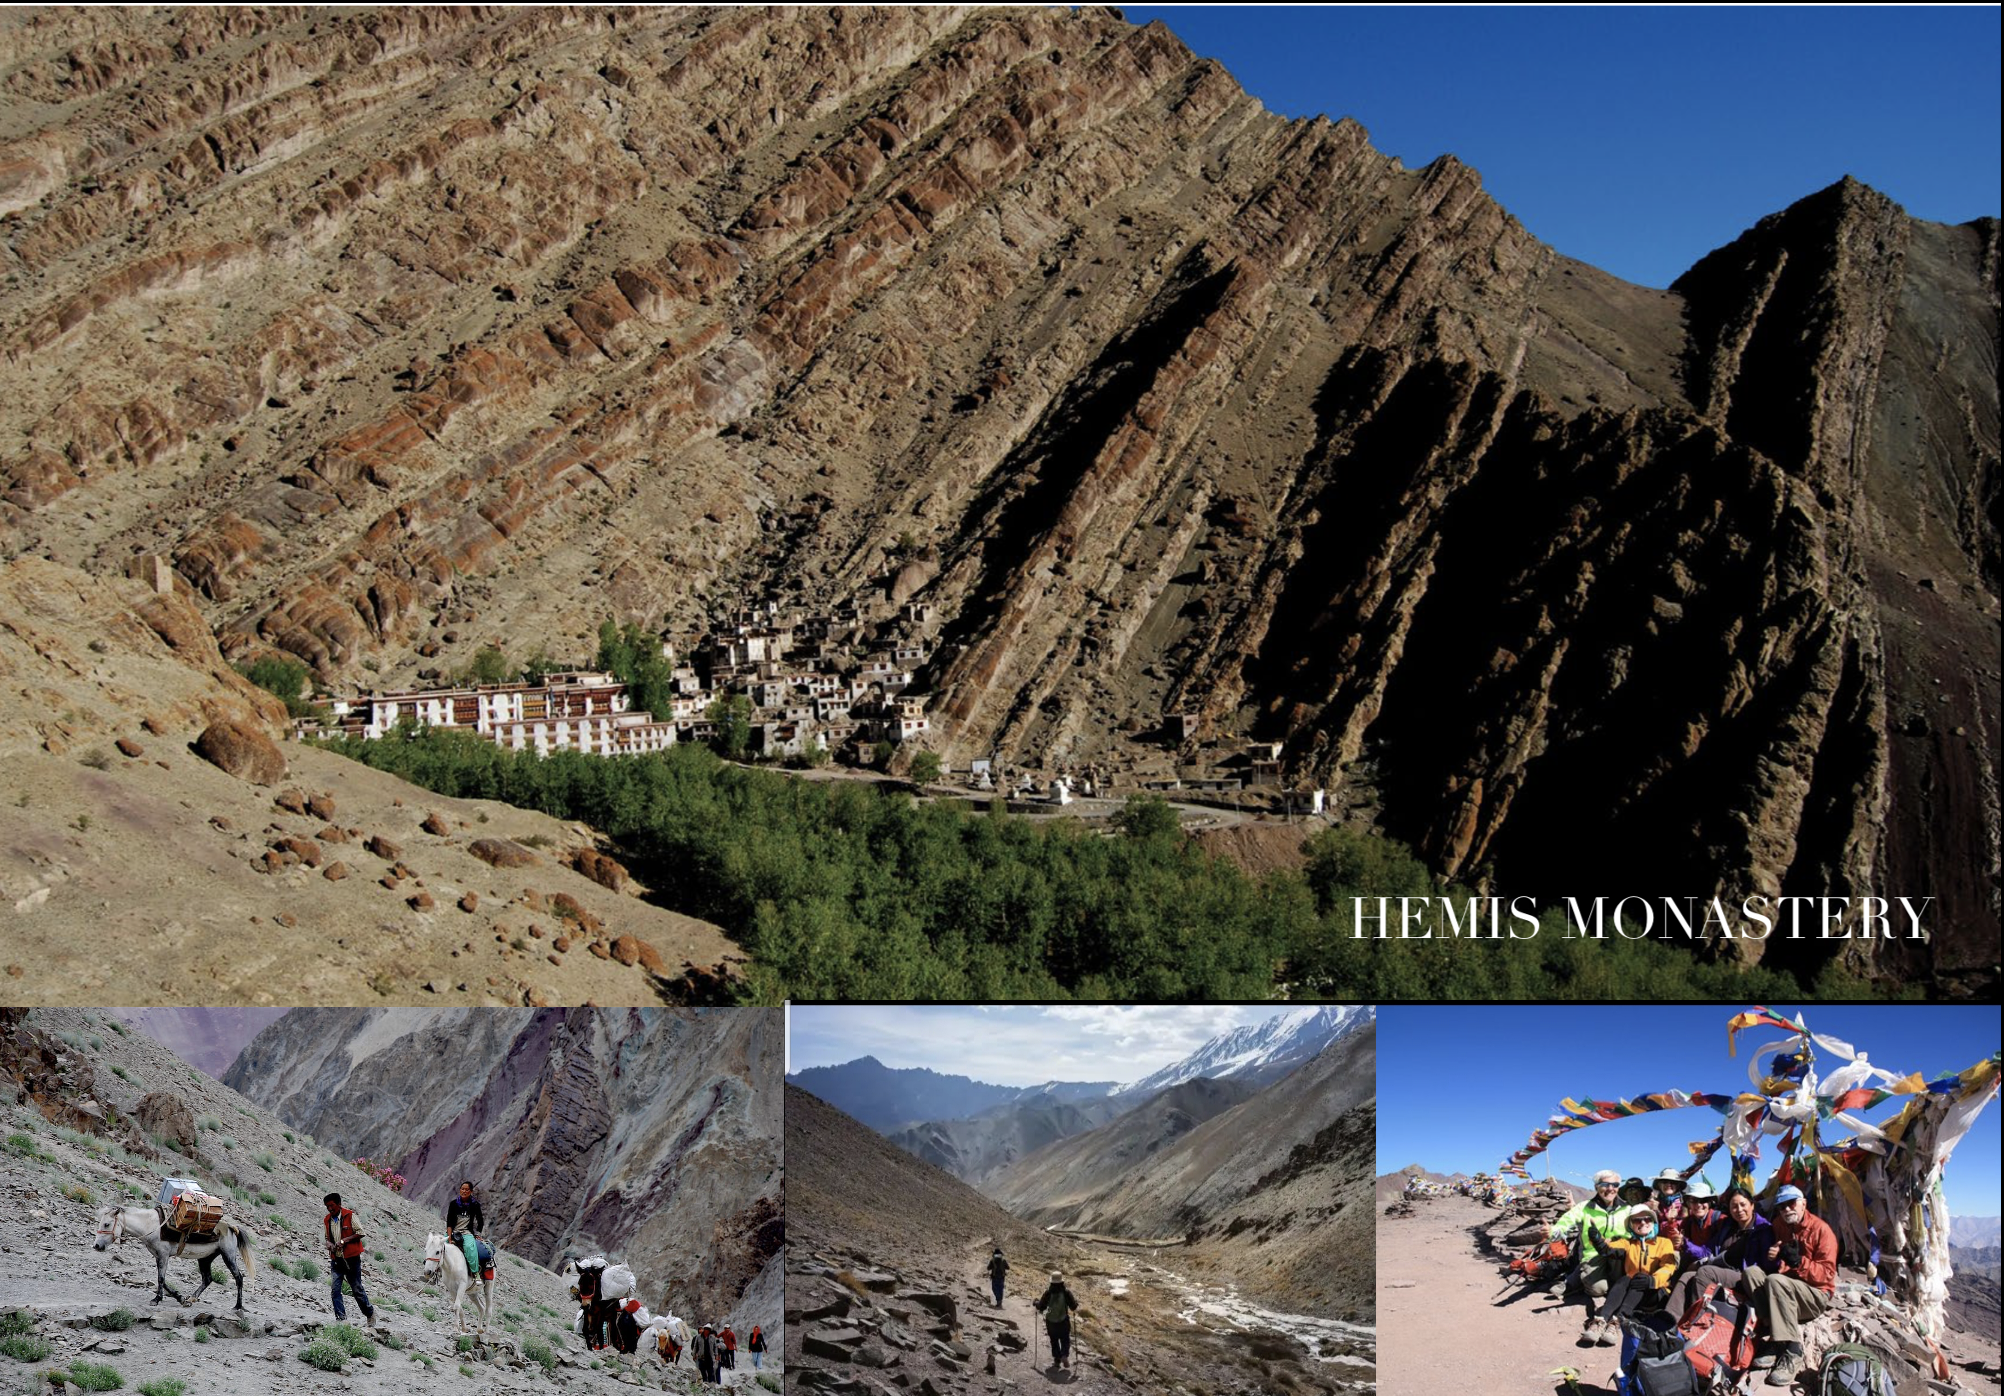 //www.specializedsportsservices.com/wp-content/uploads/2021/10/Ladakh-Sports-Tourism-pic-for-Our-Work.png